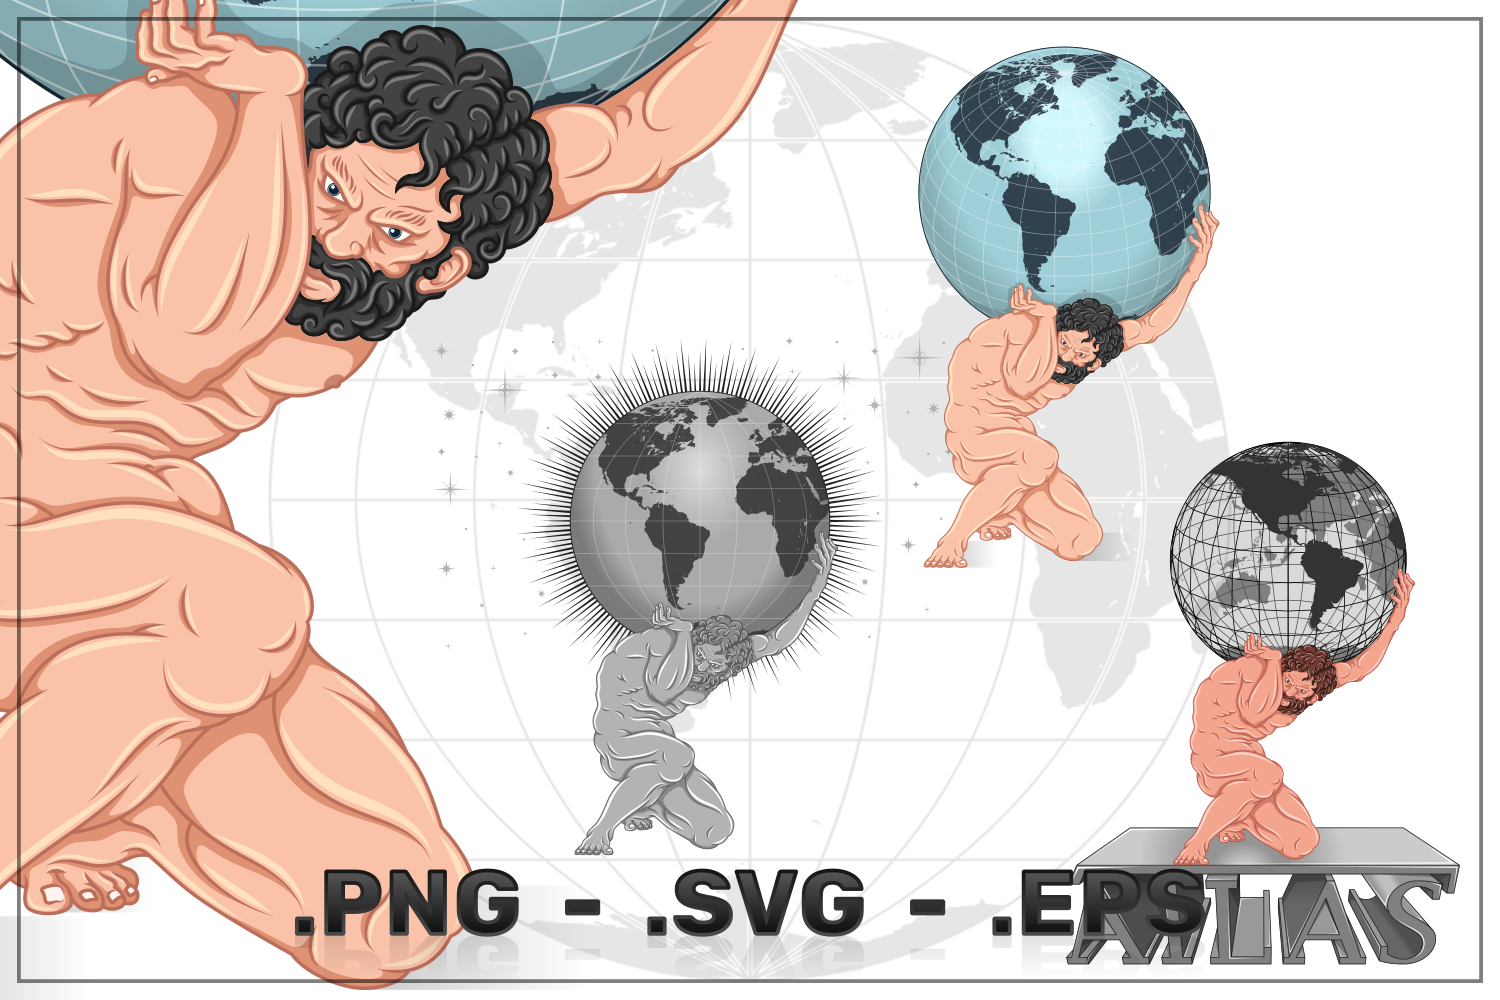 Vector Design of Atlas Holding the Earth